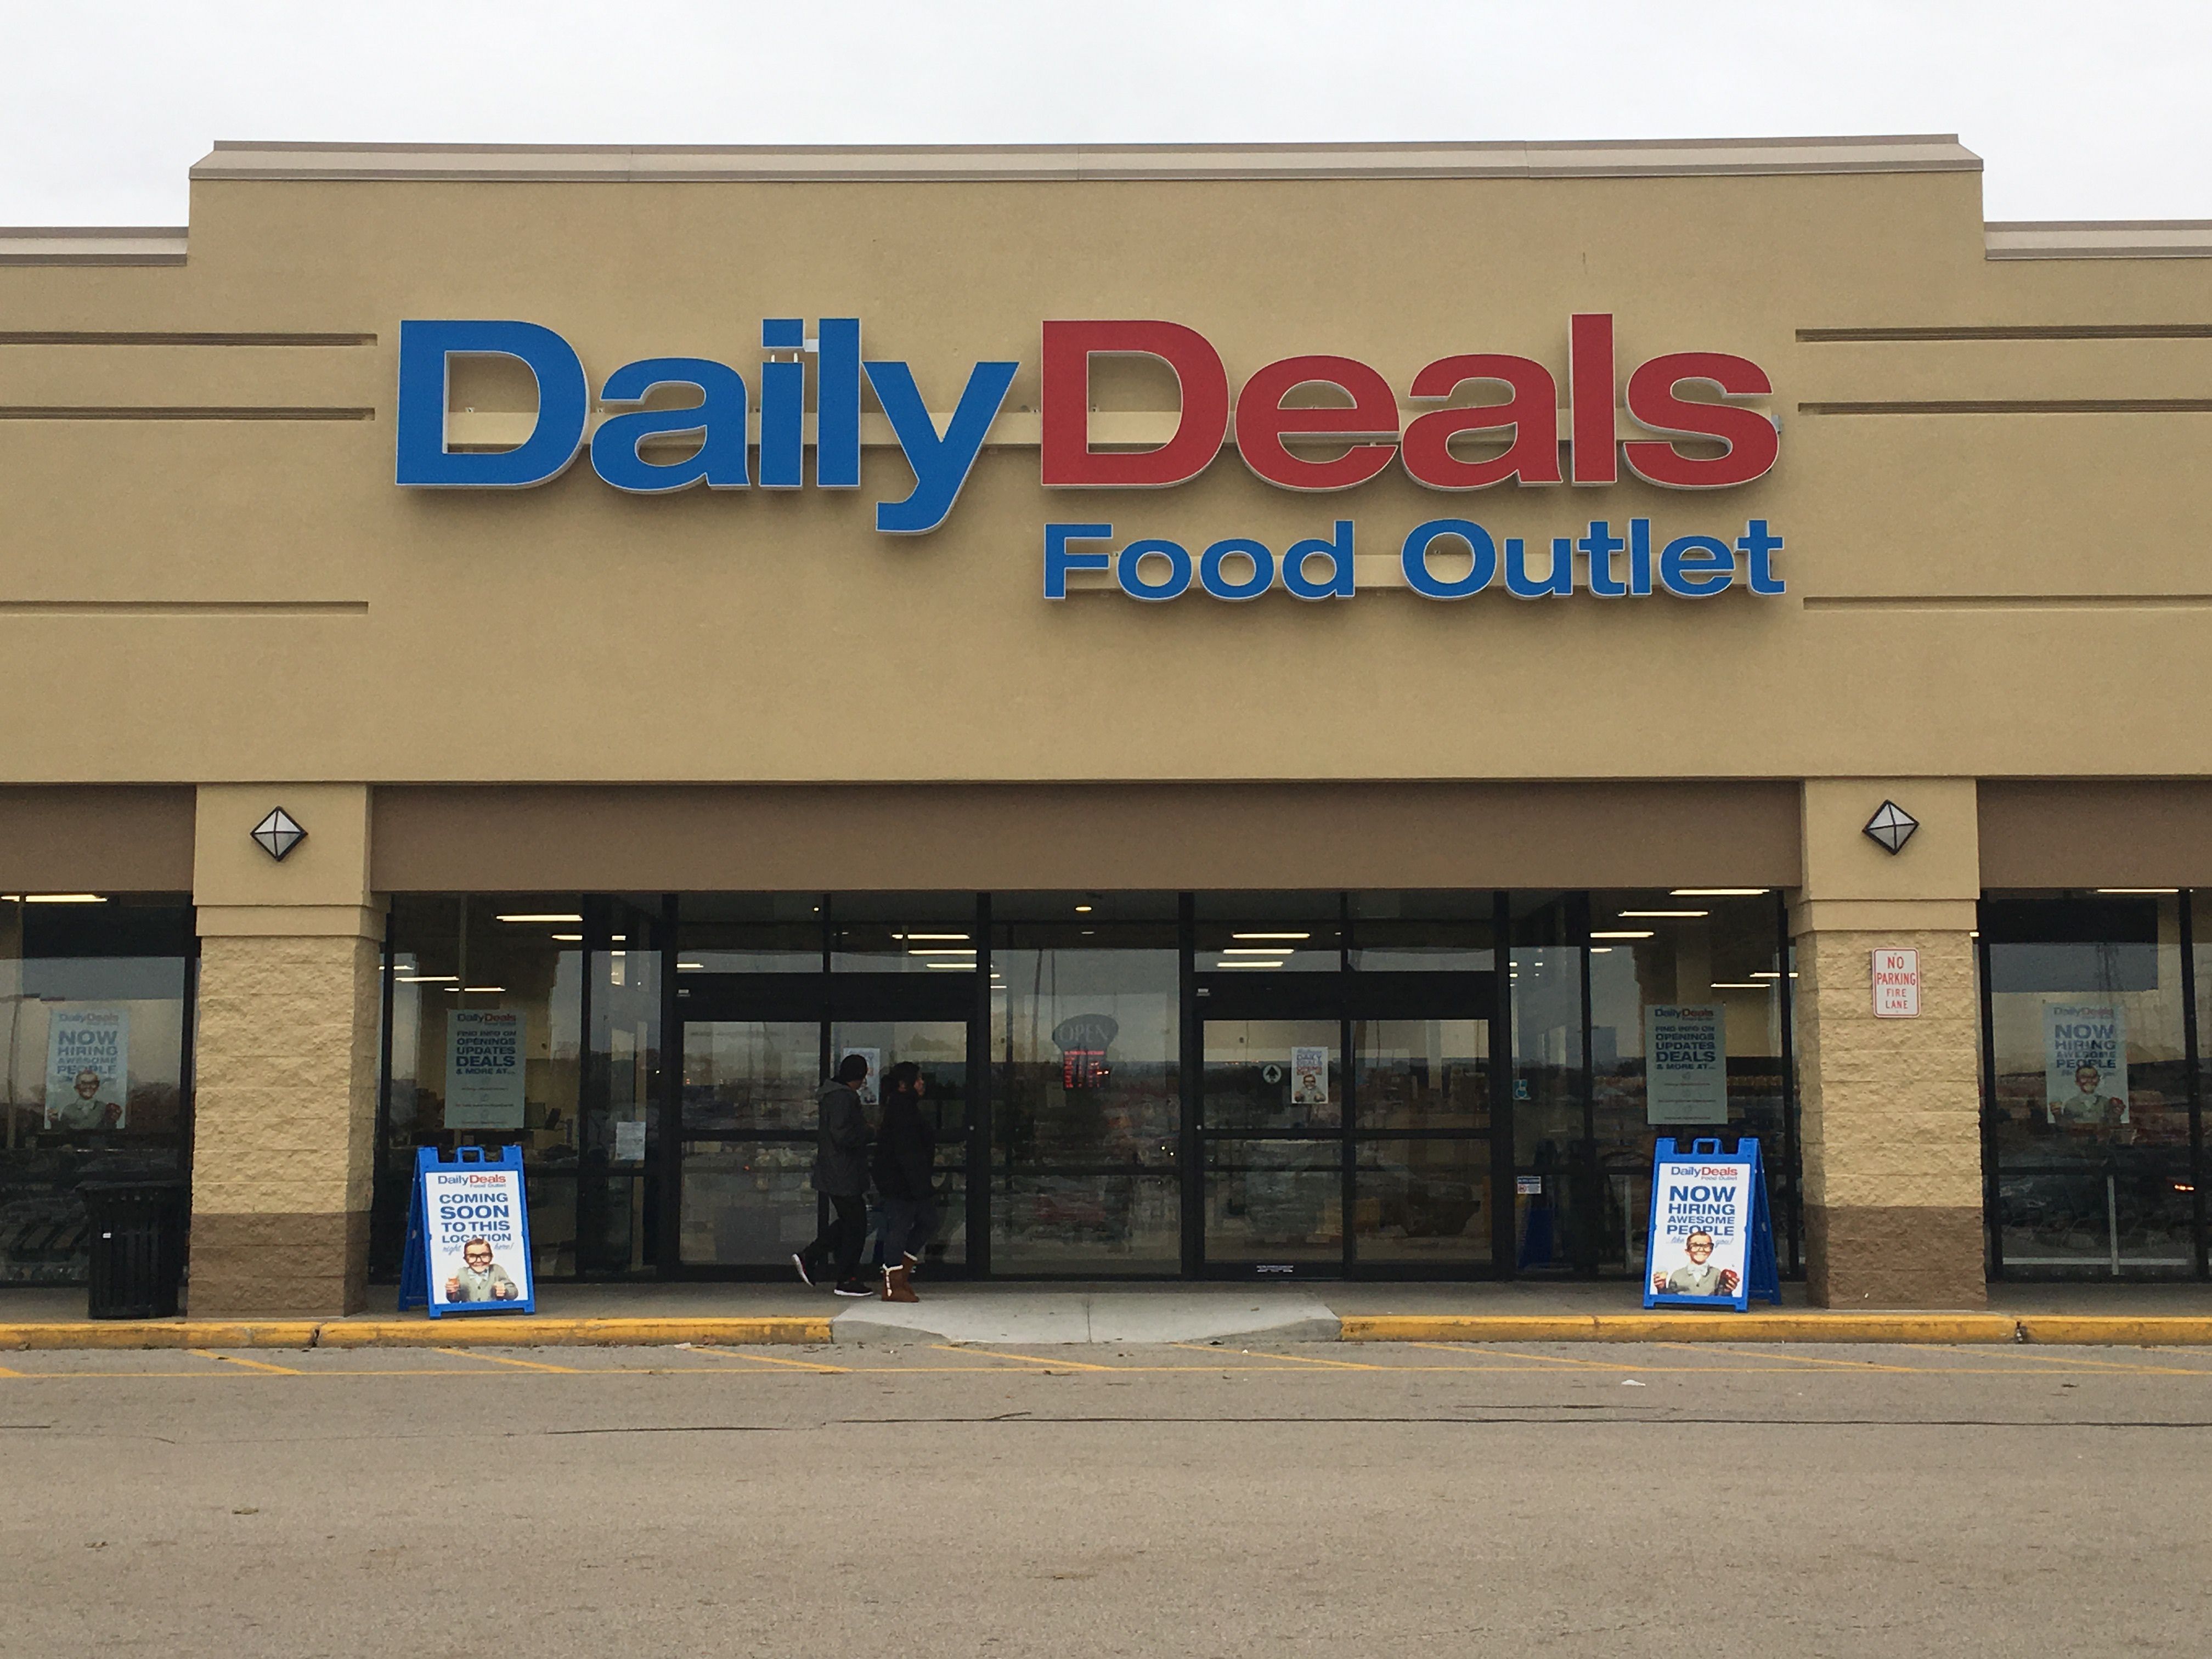 Daily Deals Food Outlet. Groceries at a Discount.